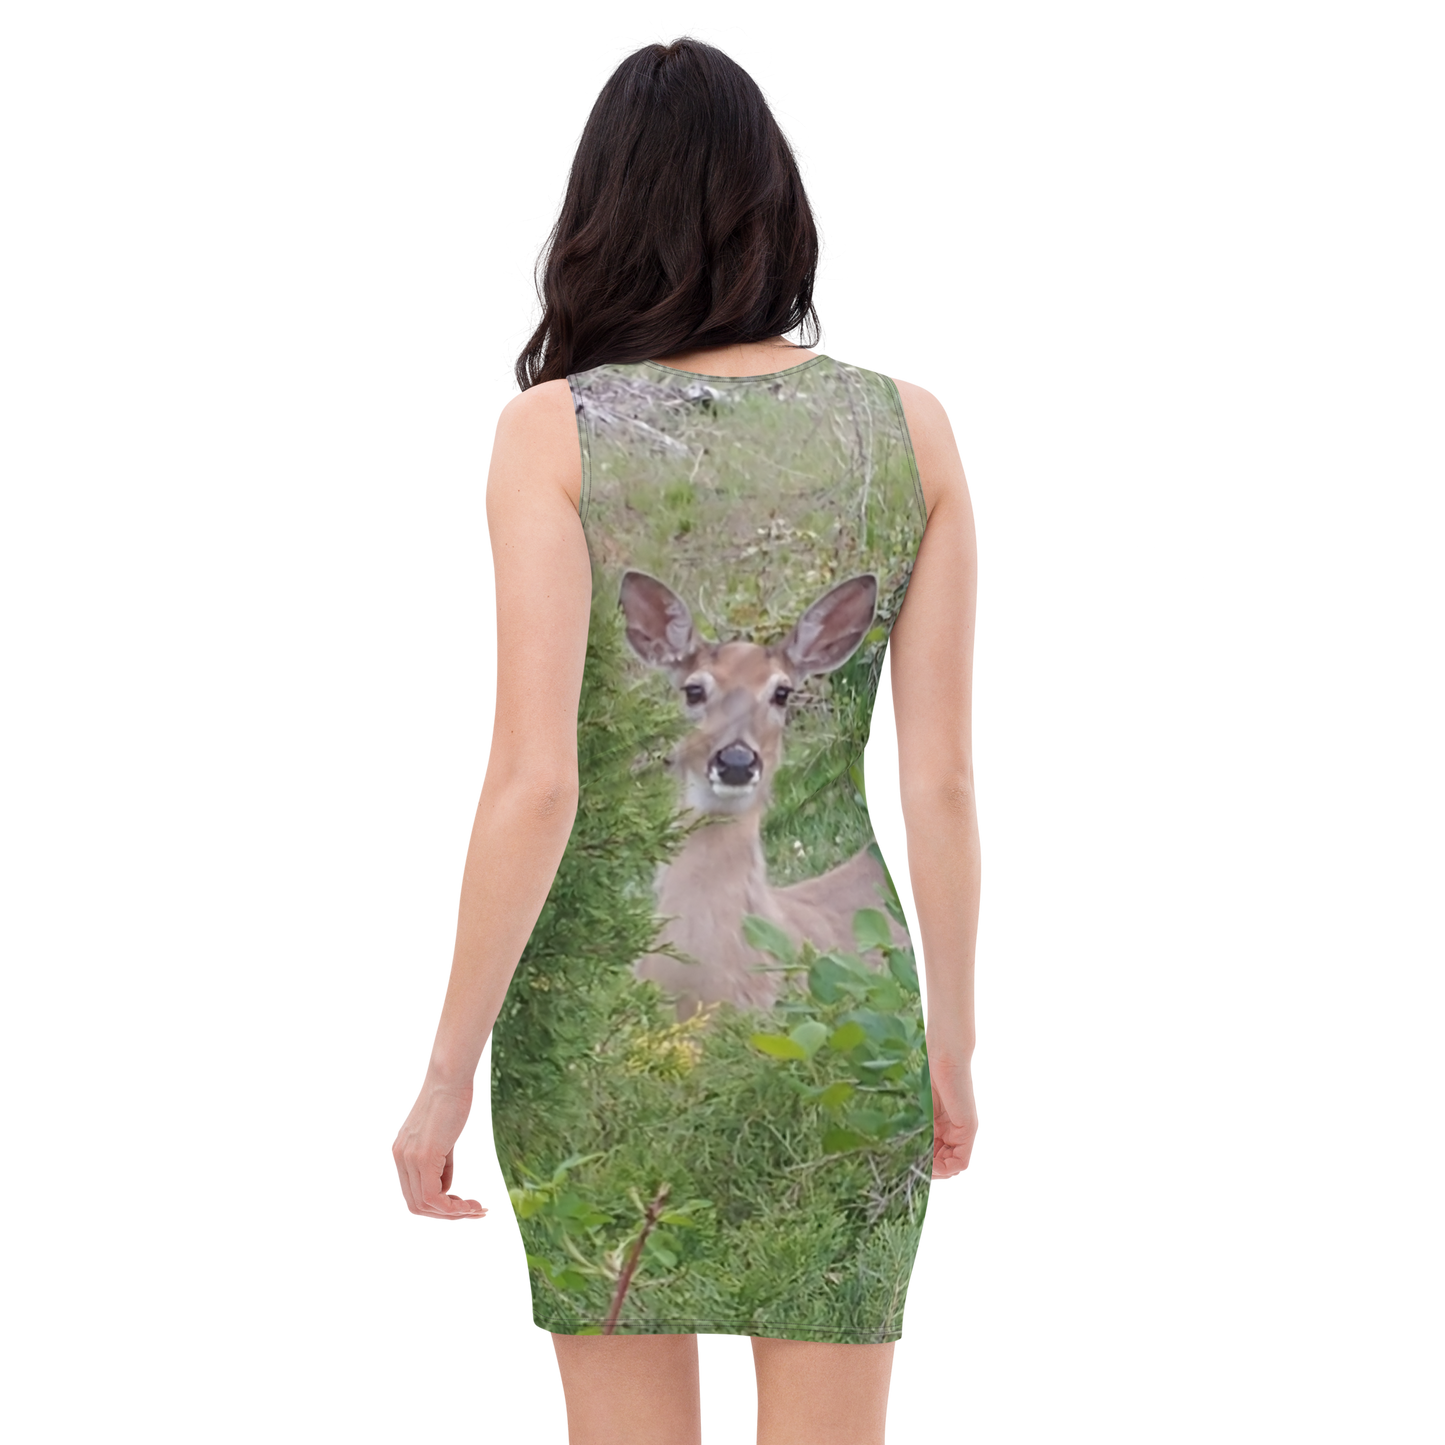 The EARTH LOVE Collection - "A Divine Doe" Design Tank Dress